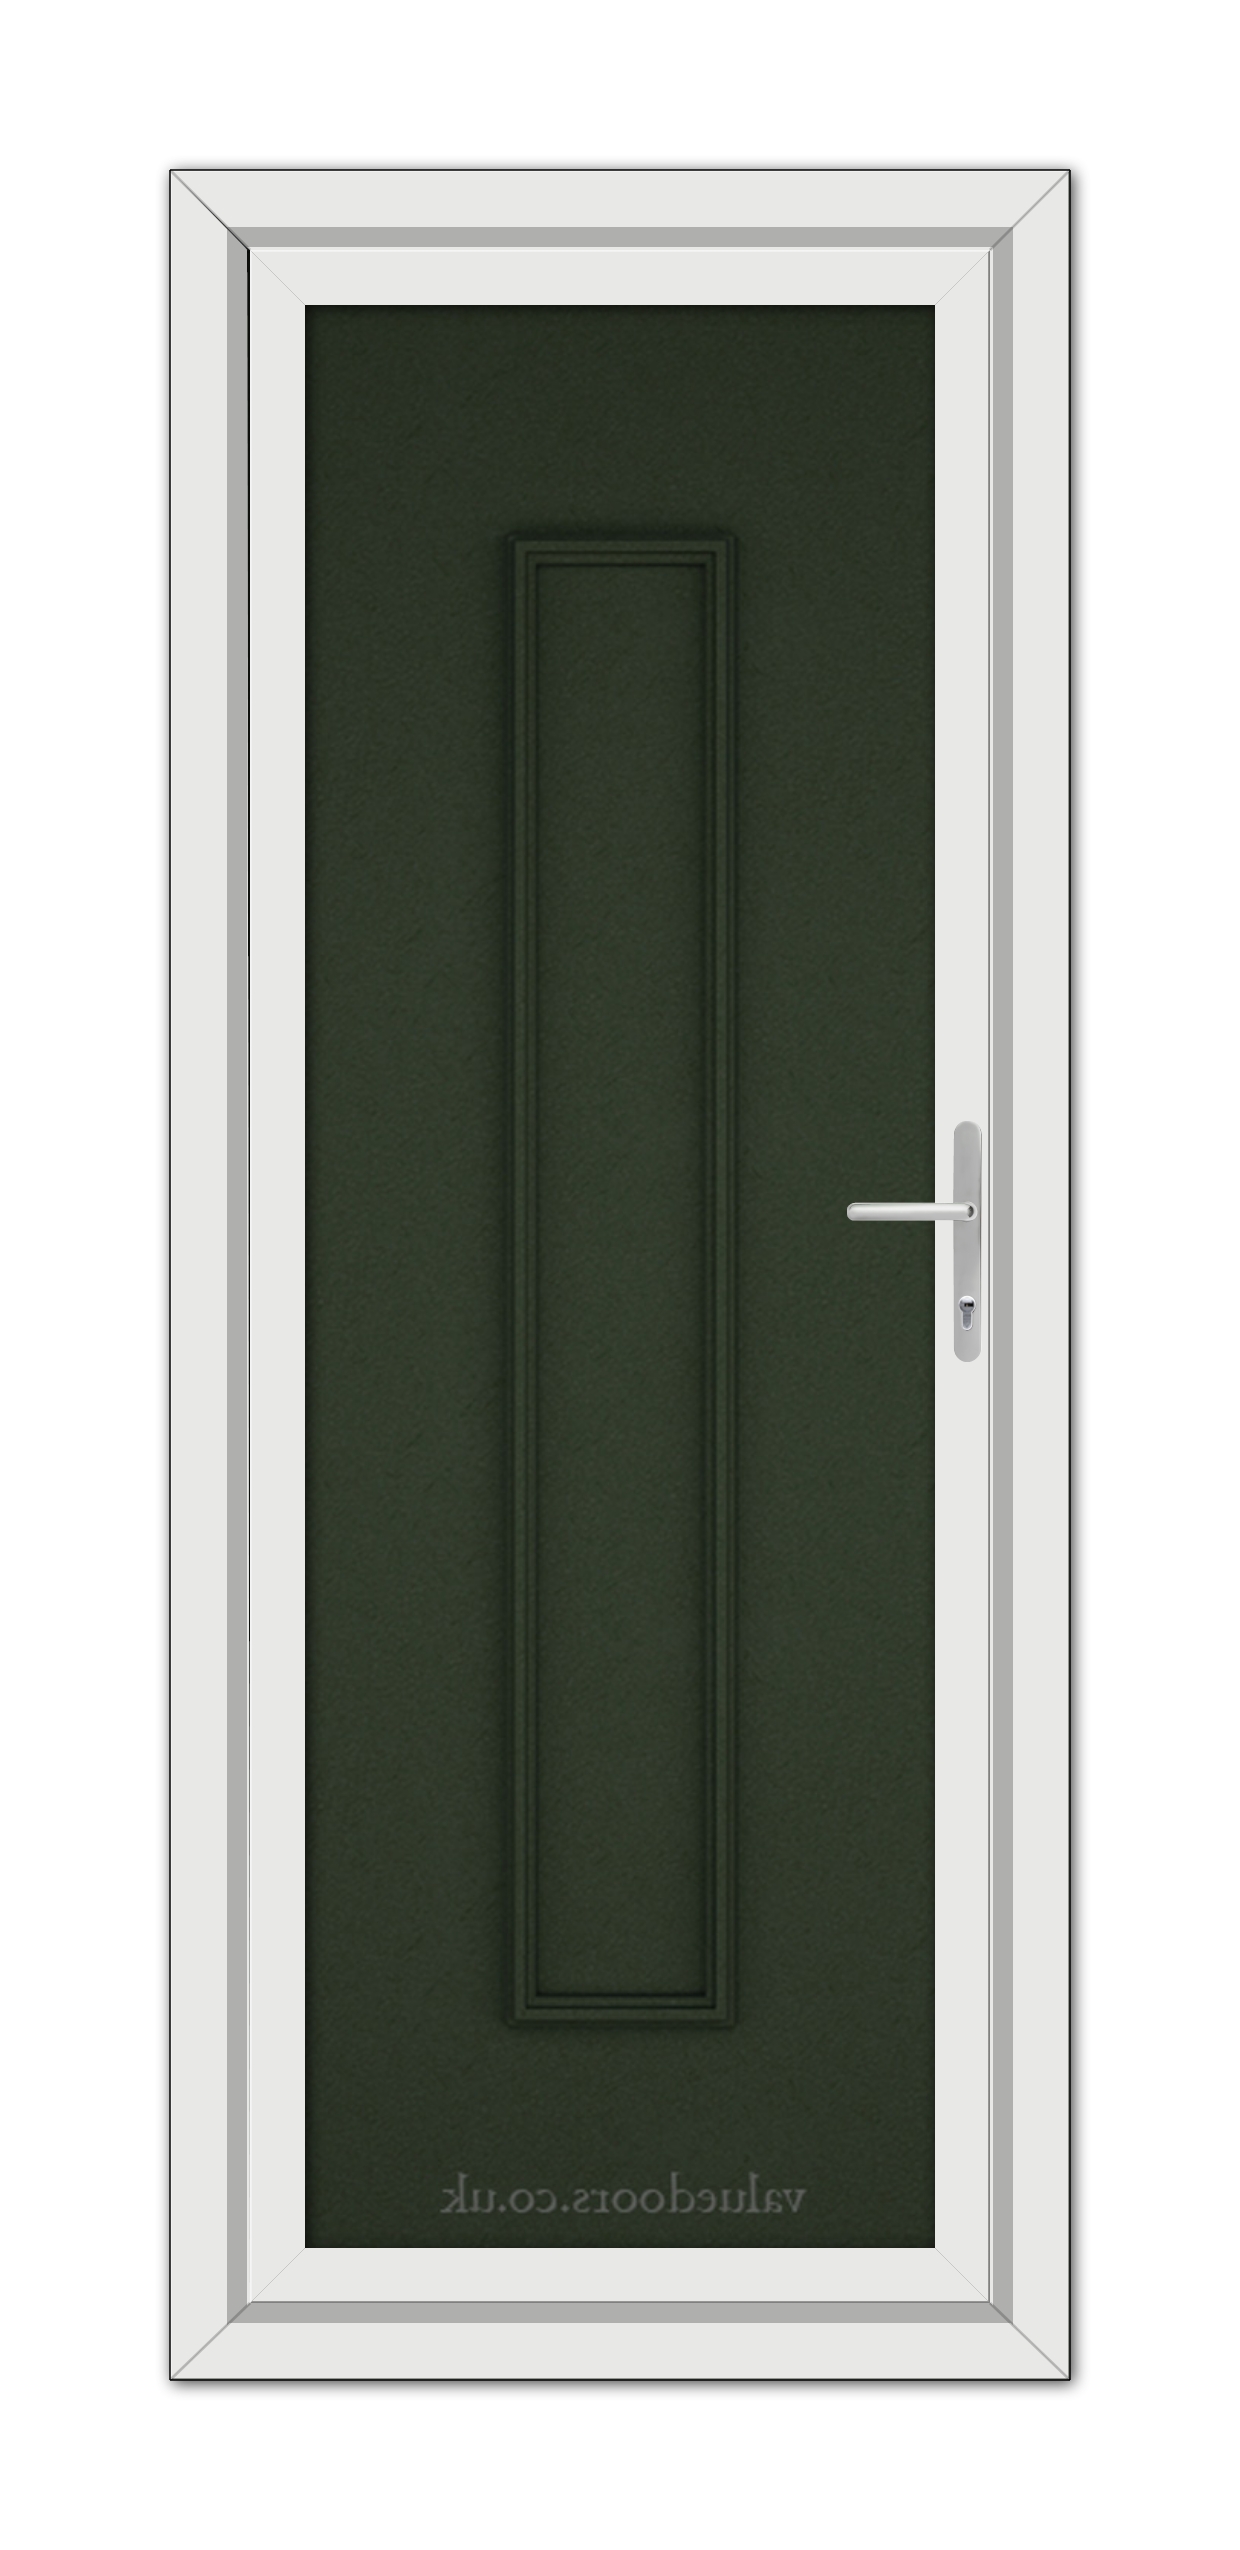 A modern, Green Rome Solid uPVC Door with a long, vertical, rectangular panel and a silver handle framed in white.